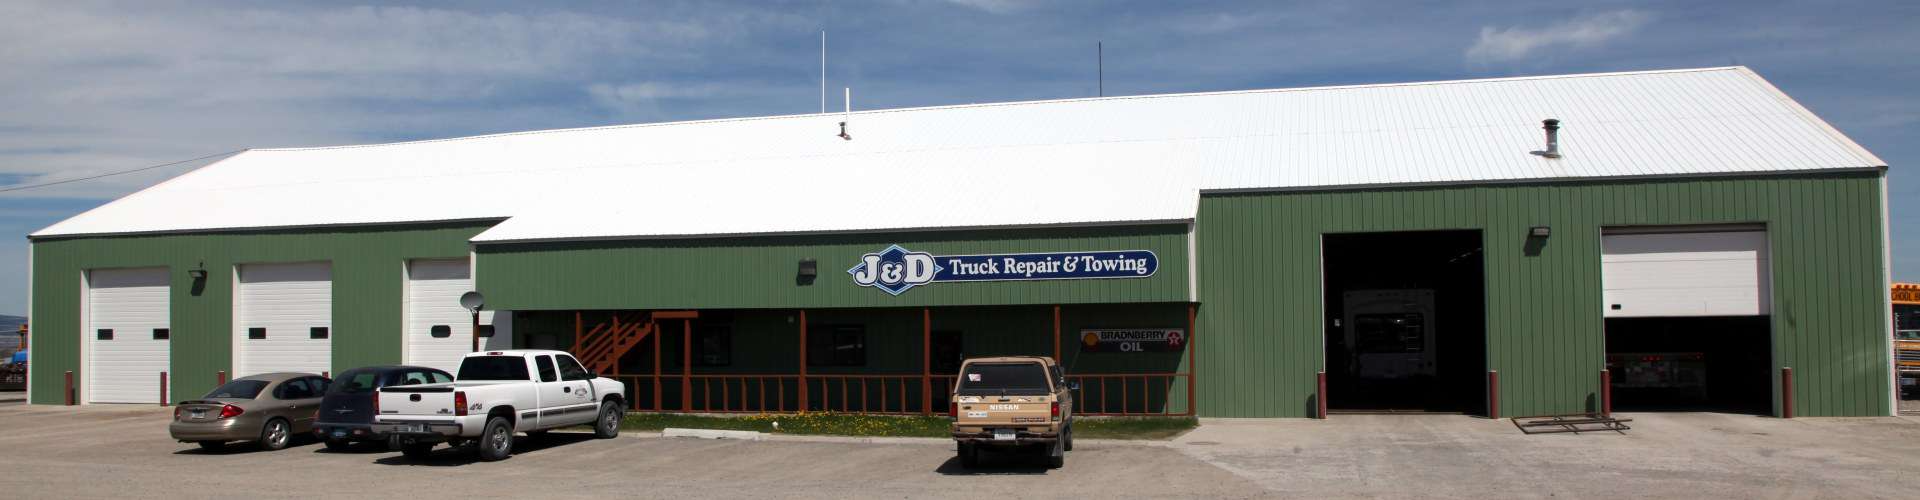 J&D Truck Repair and Towing Towing.com Profile Banner